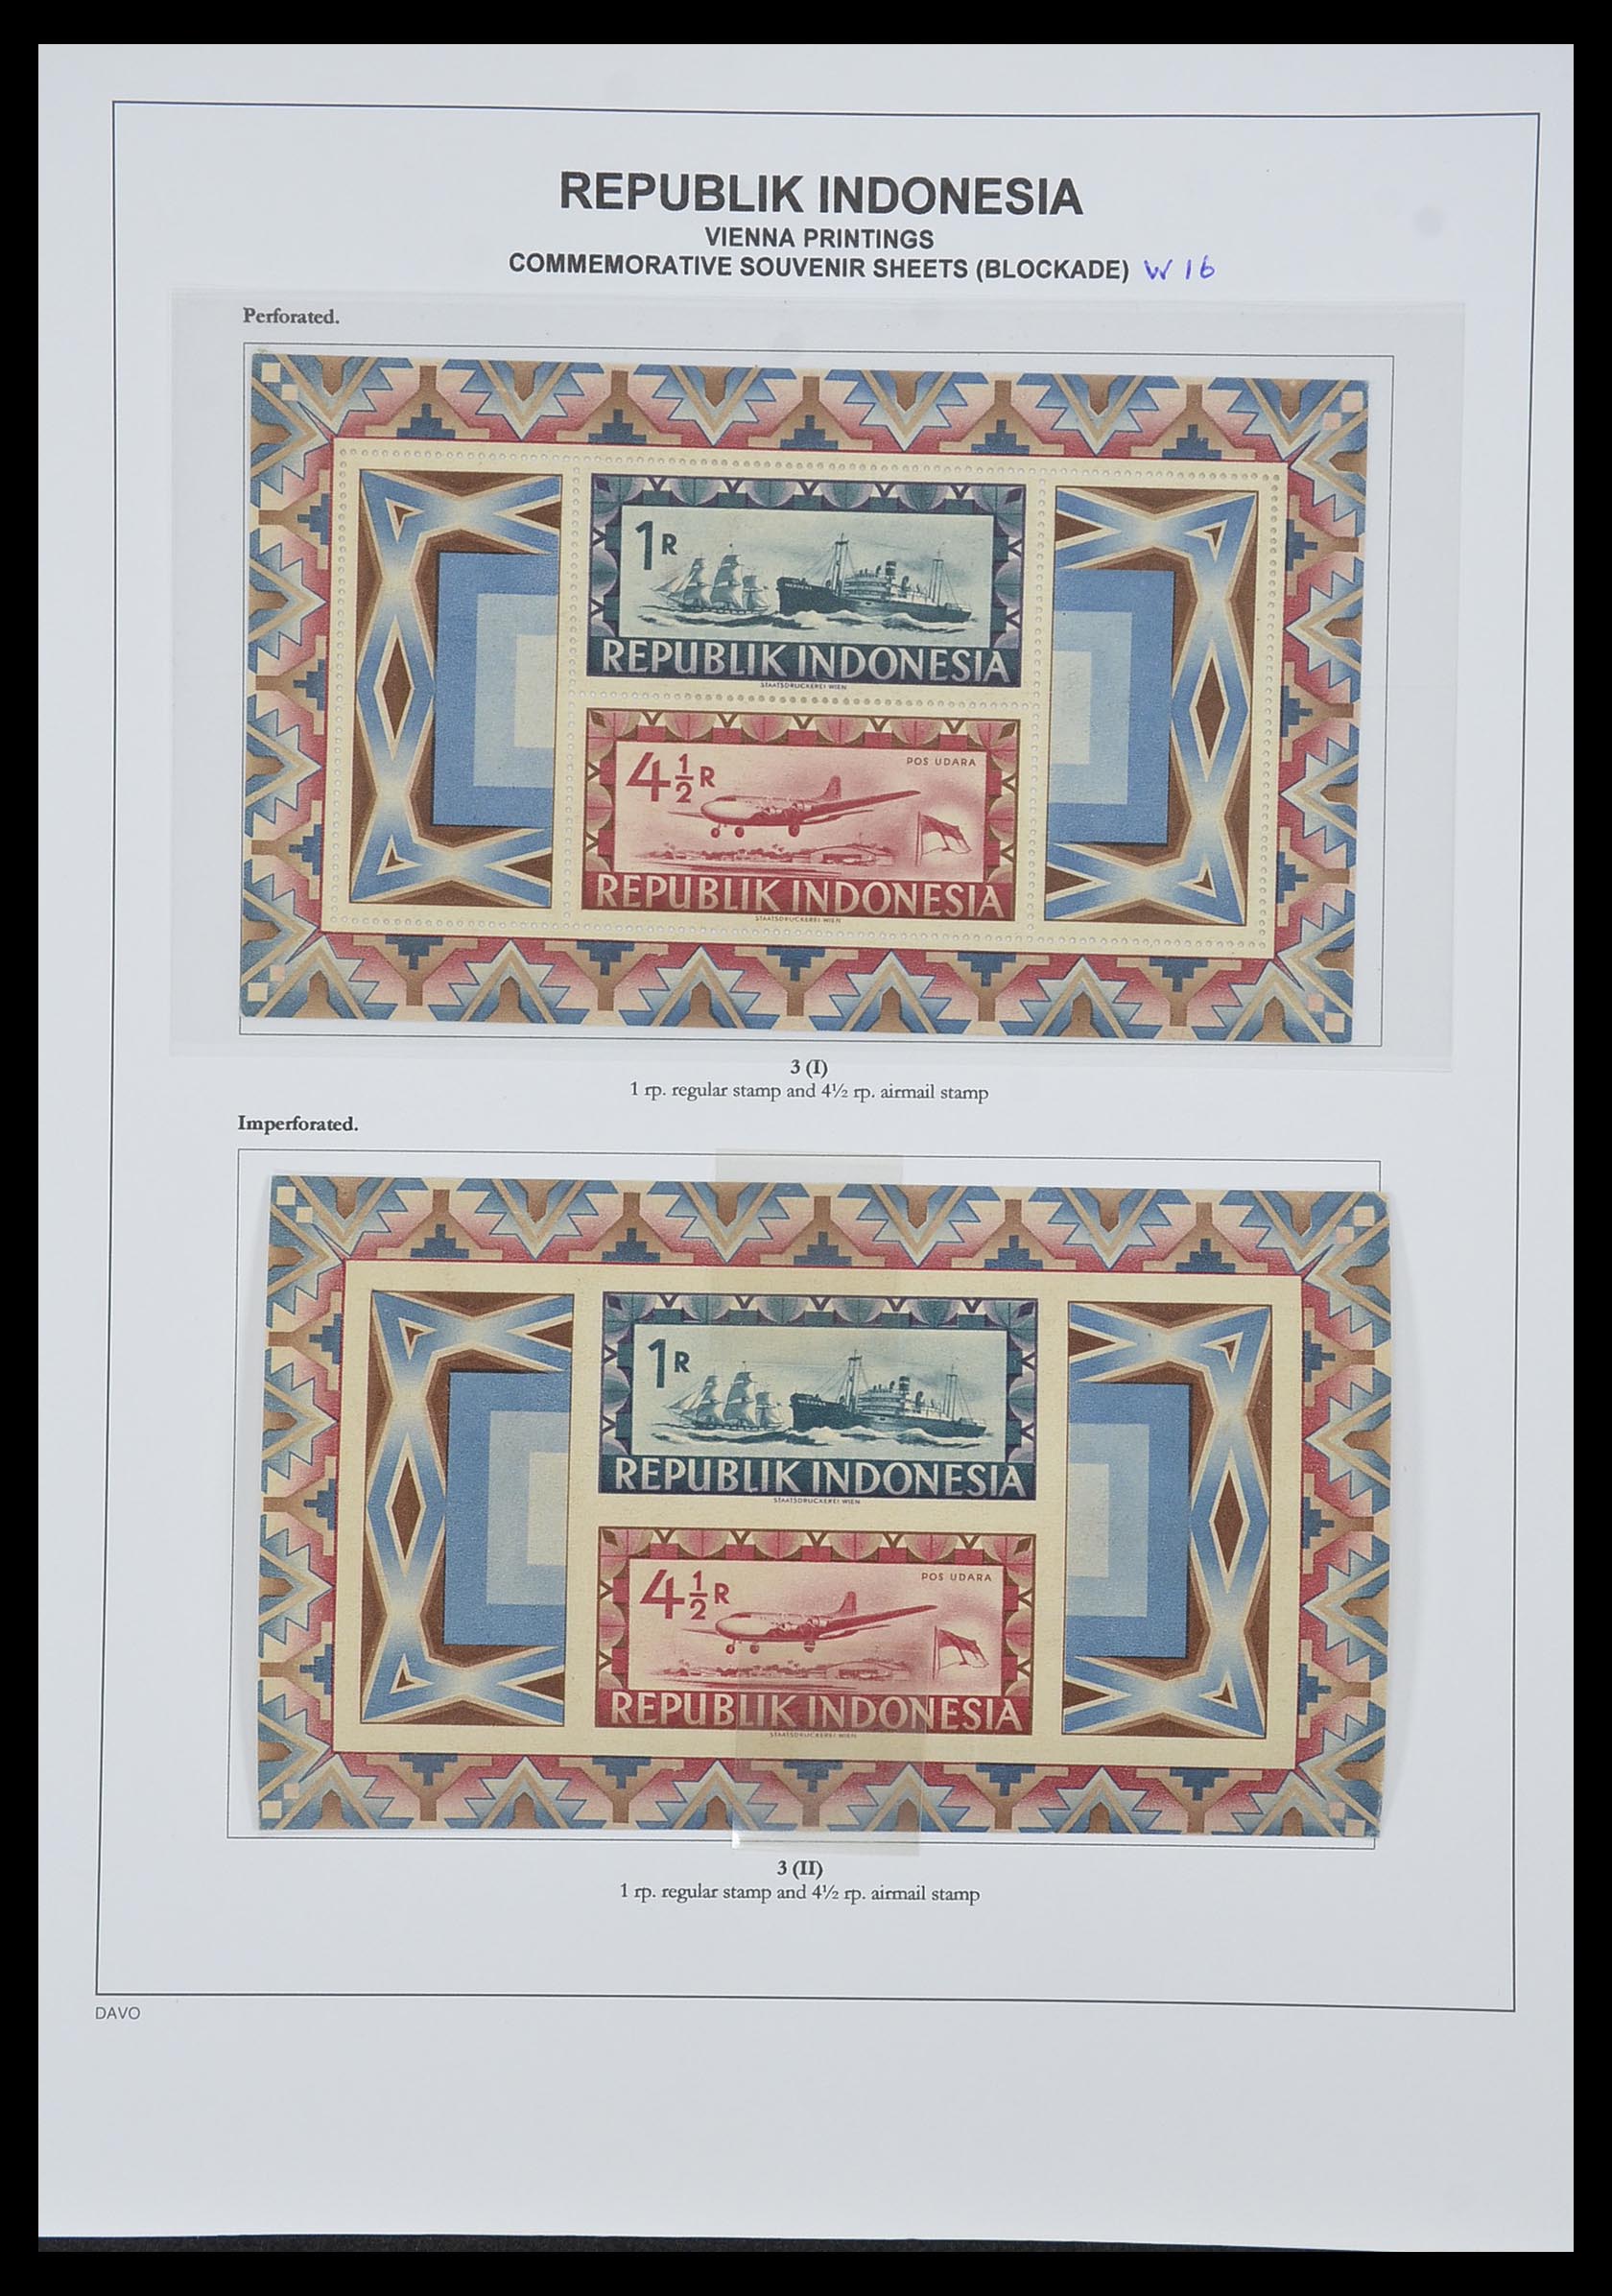 33988 030 - Stamp collection 33988 Vienna printings Indonesia.